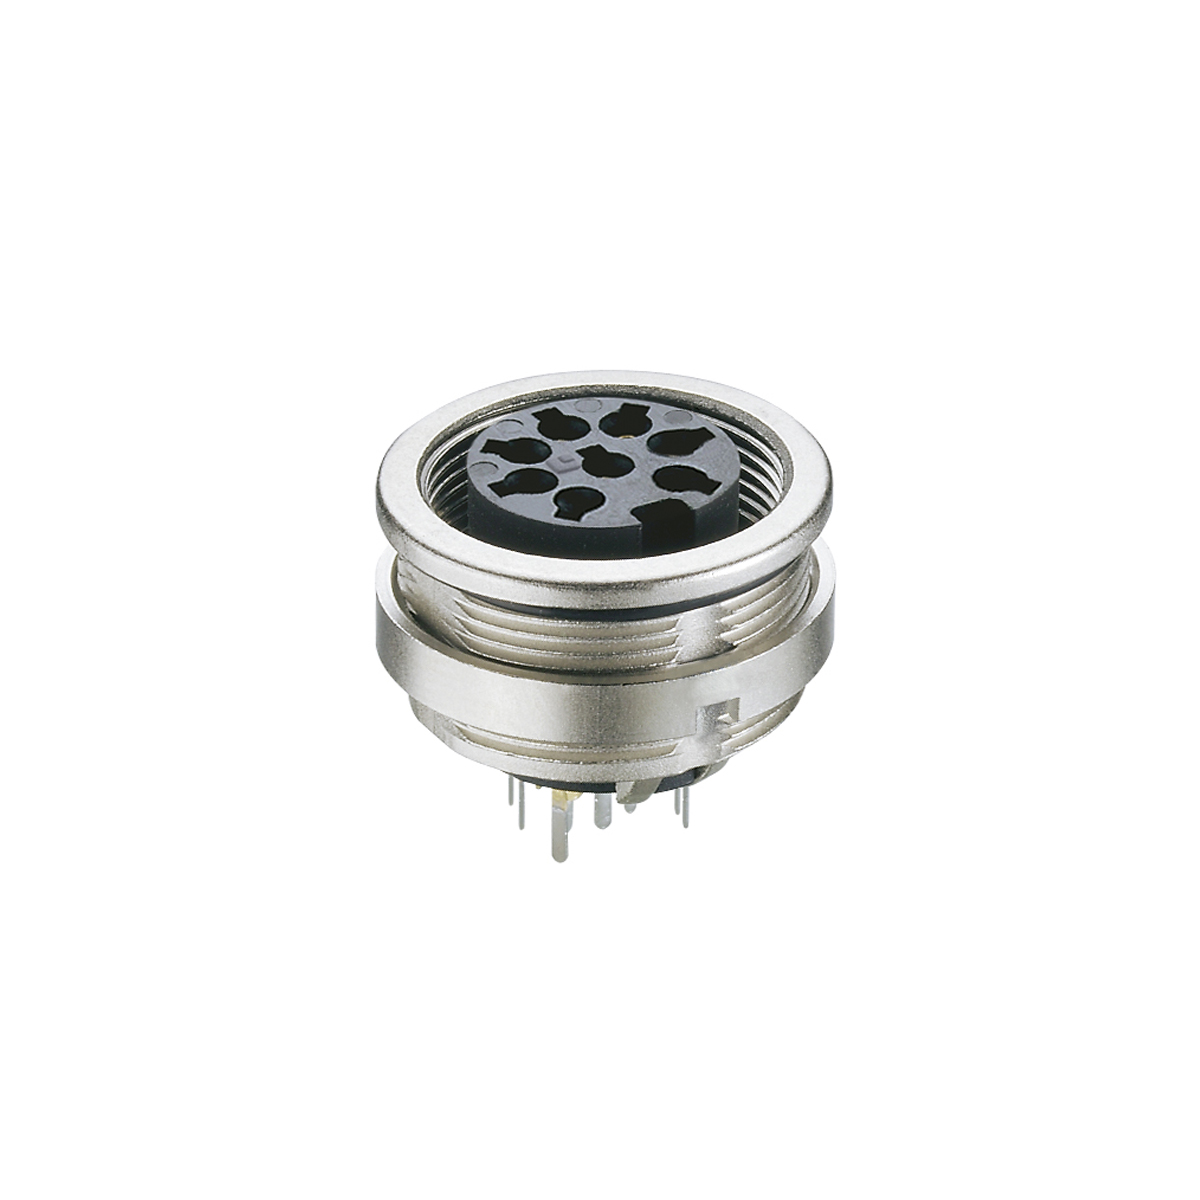 Lumberg: 0306-1 (Series 03 | Circular connectors with threaded joint M16 acc. to IEC 61076-2-106, IP40/IP68)